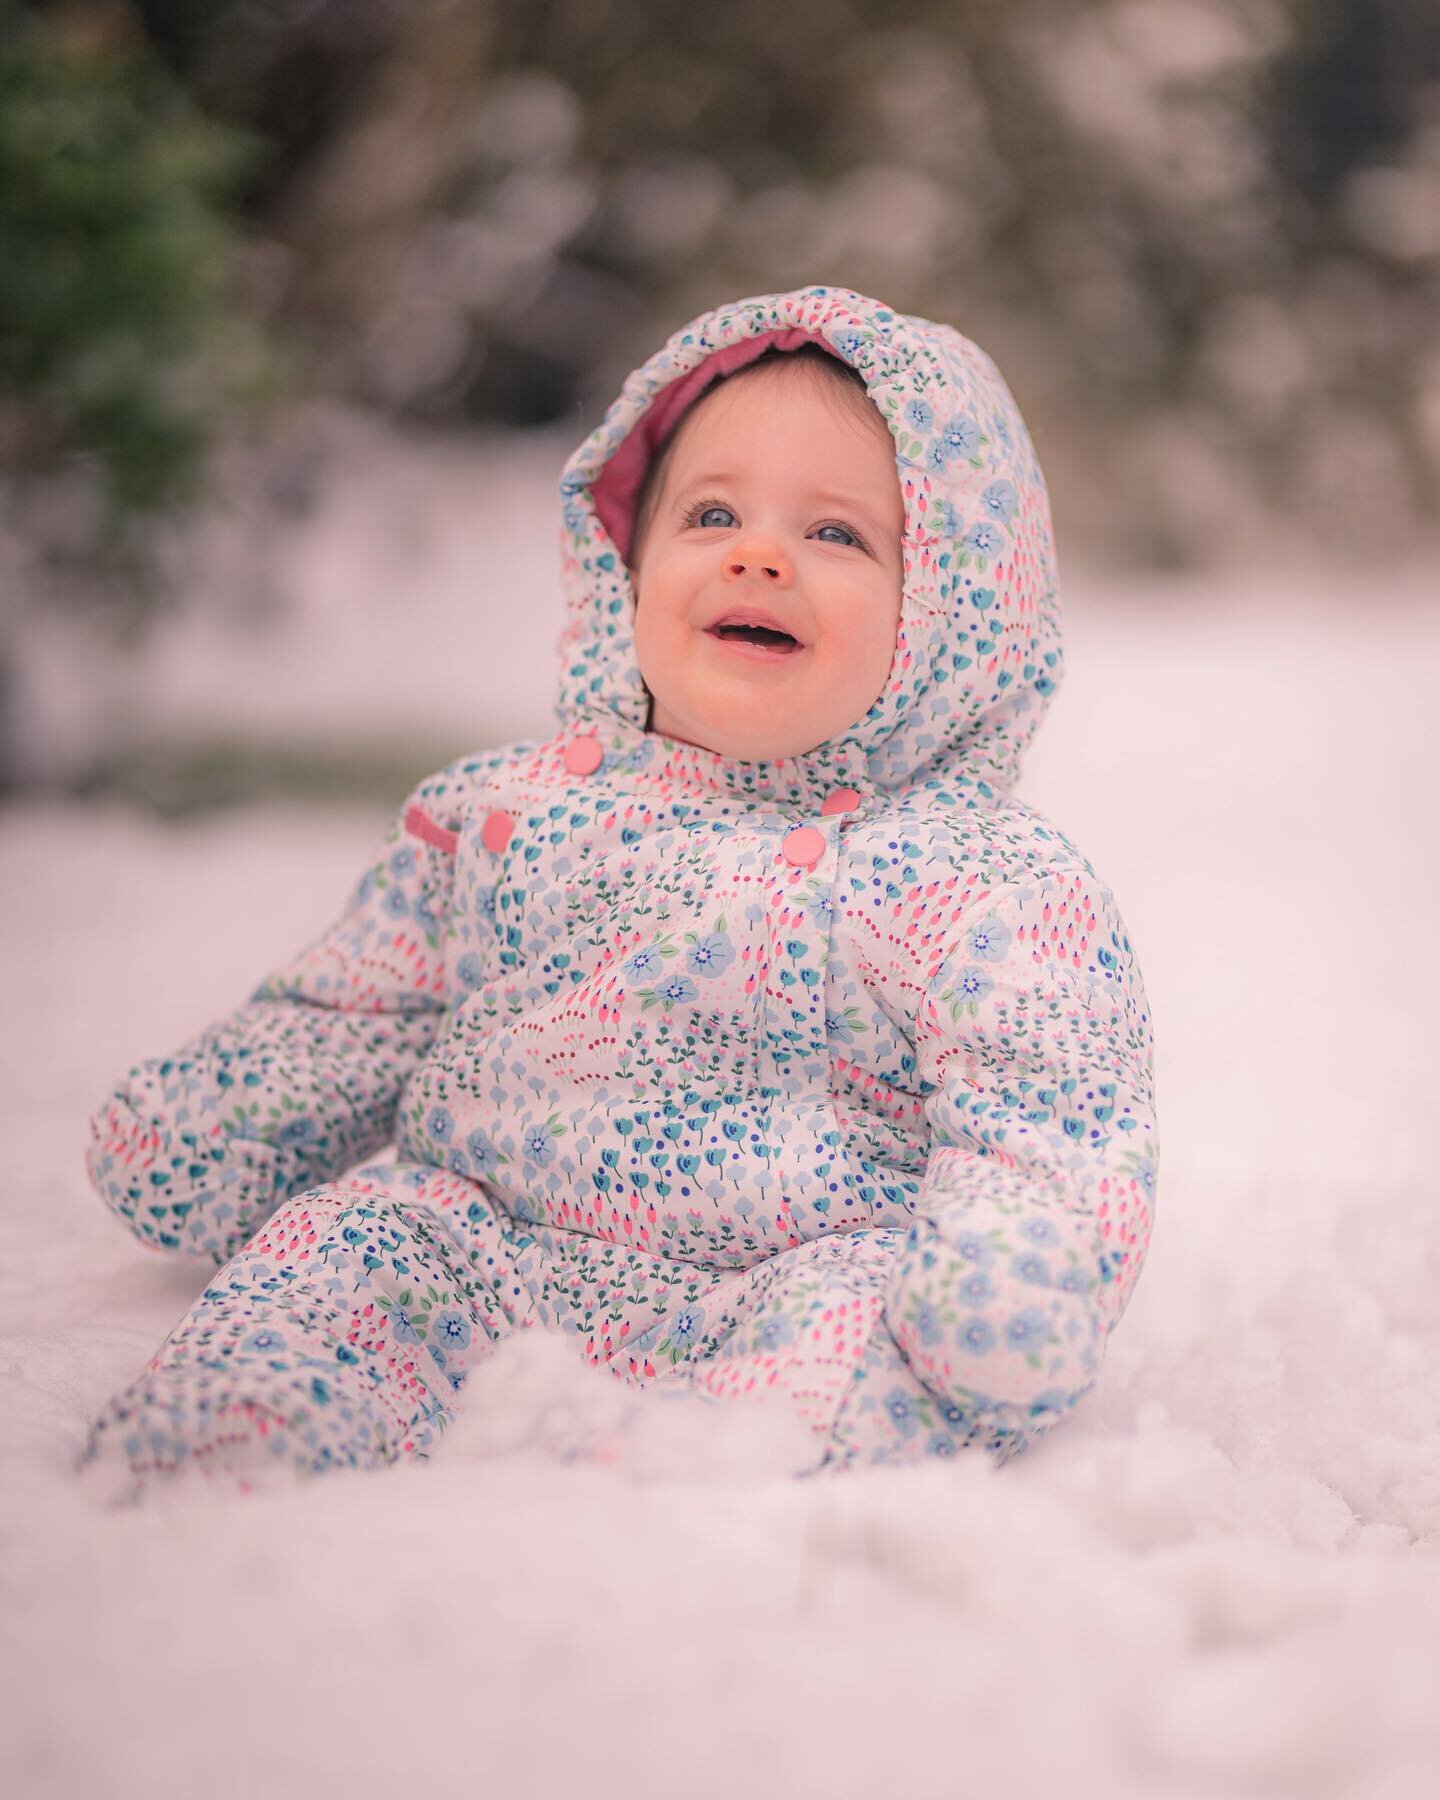 The snow might be mostly gone, but the memories will last forever... of making your baby daughter sit in cold white stuff whilst she looked confused...
&bull;
&bull;
&bull;
&bull;
&bull;
#daughter #portraitphotography  #portraits #portraiture #mydaug